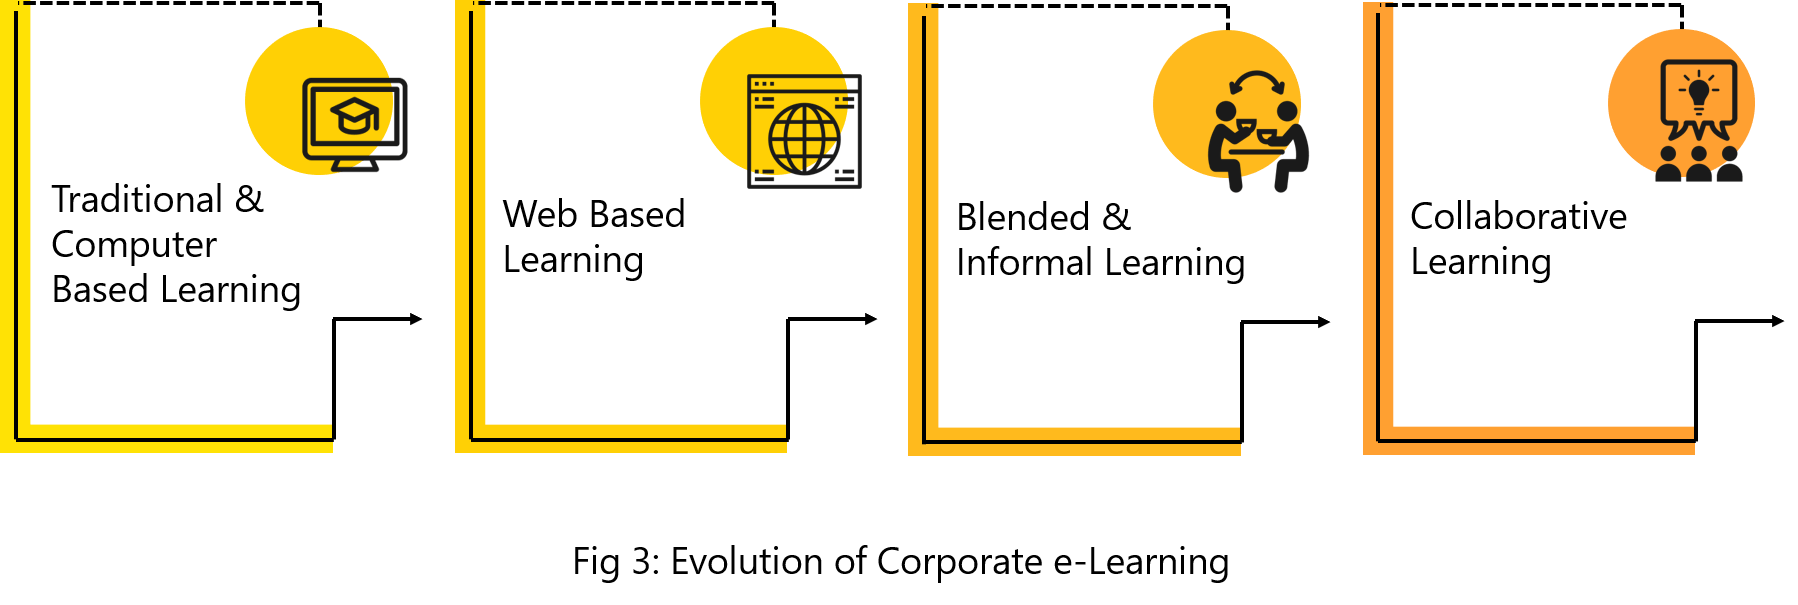 evolution of corporate eLearning